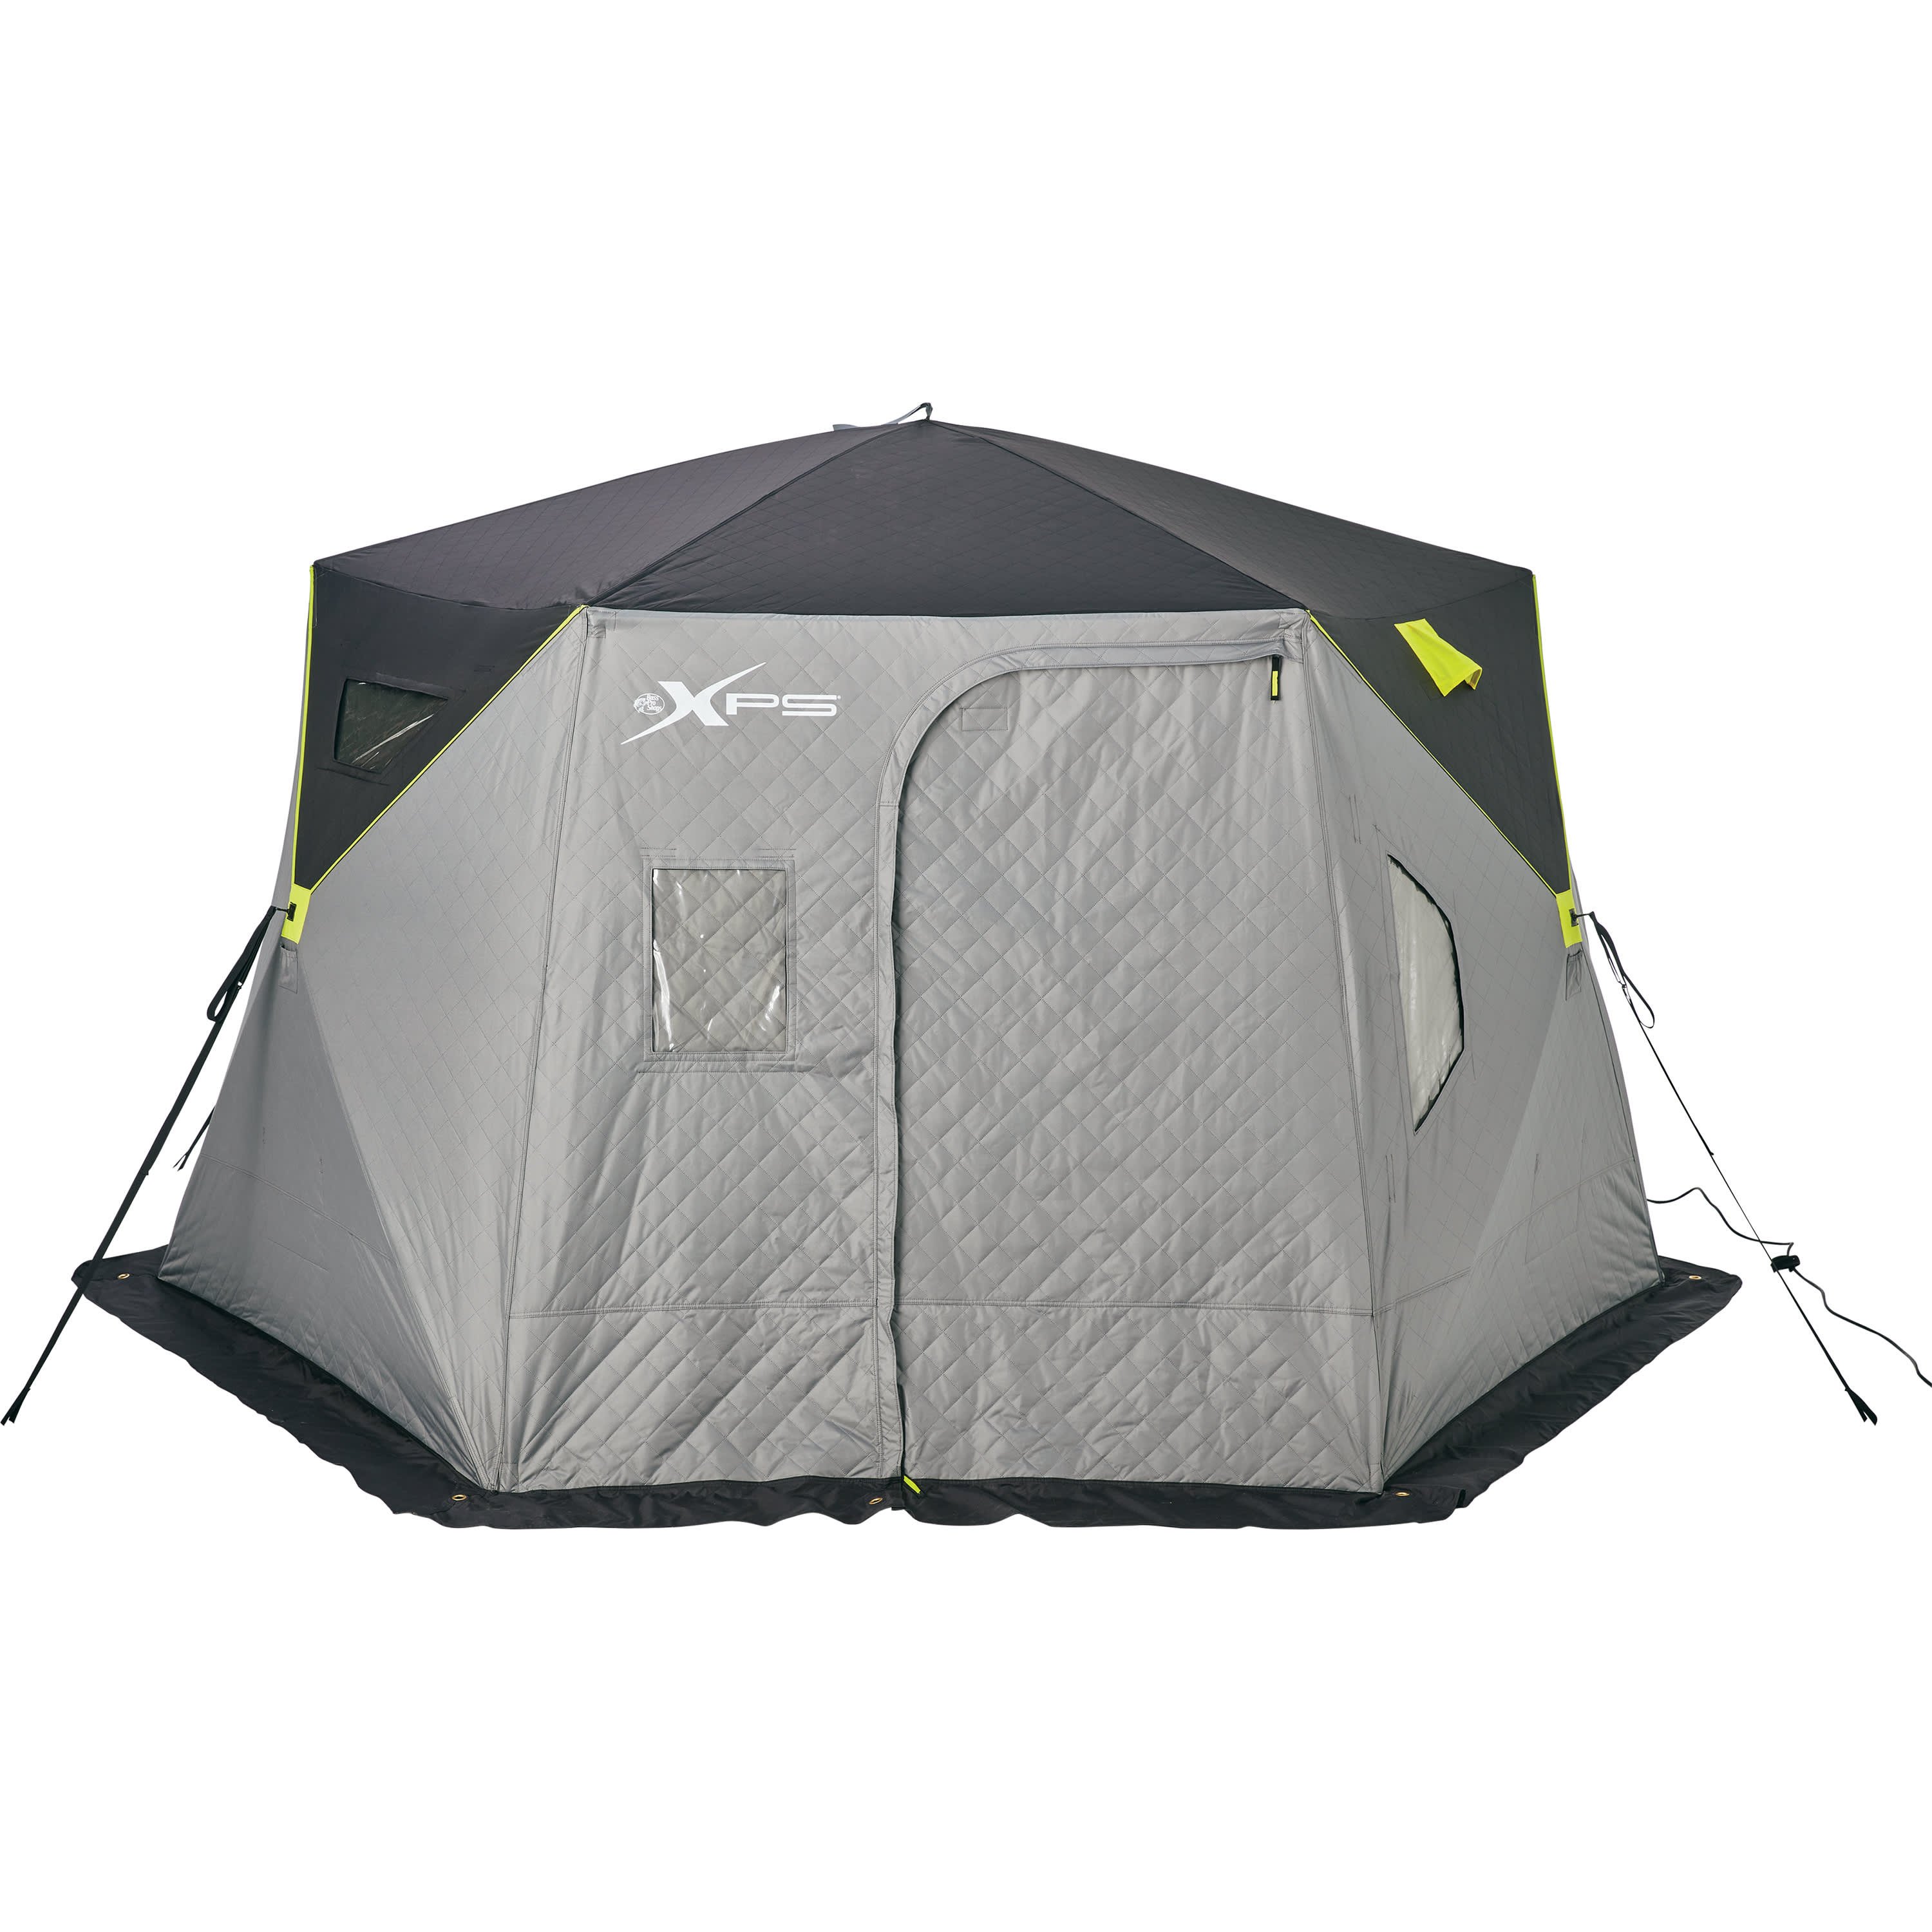 Bass Pro Shops® XPS® 6-Sided Thermal Wide-Door Ice Shelter | Cabela's Canada